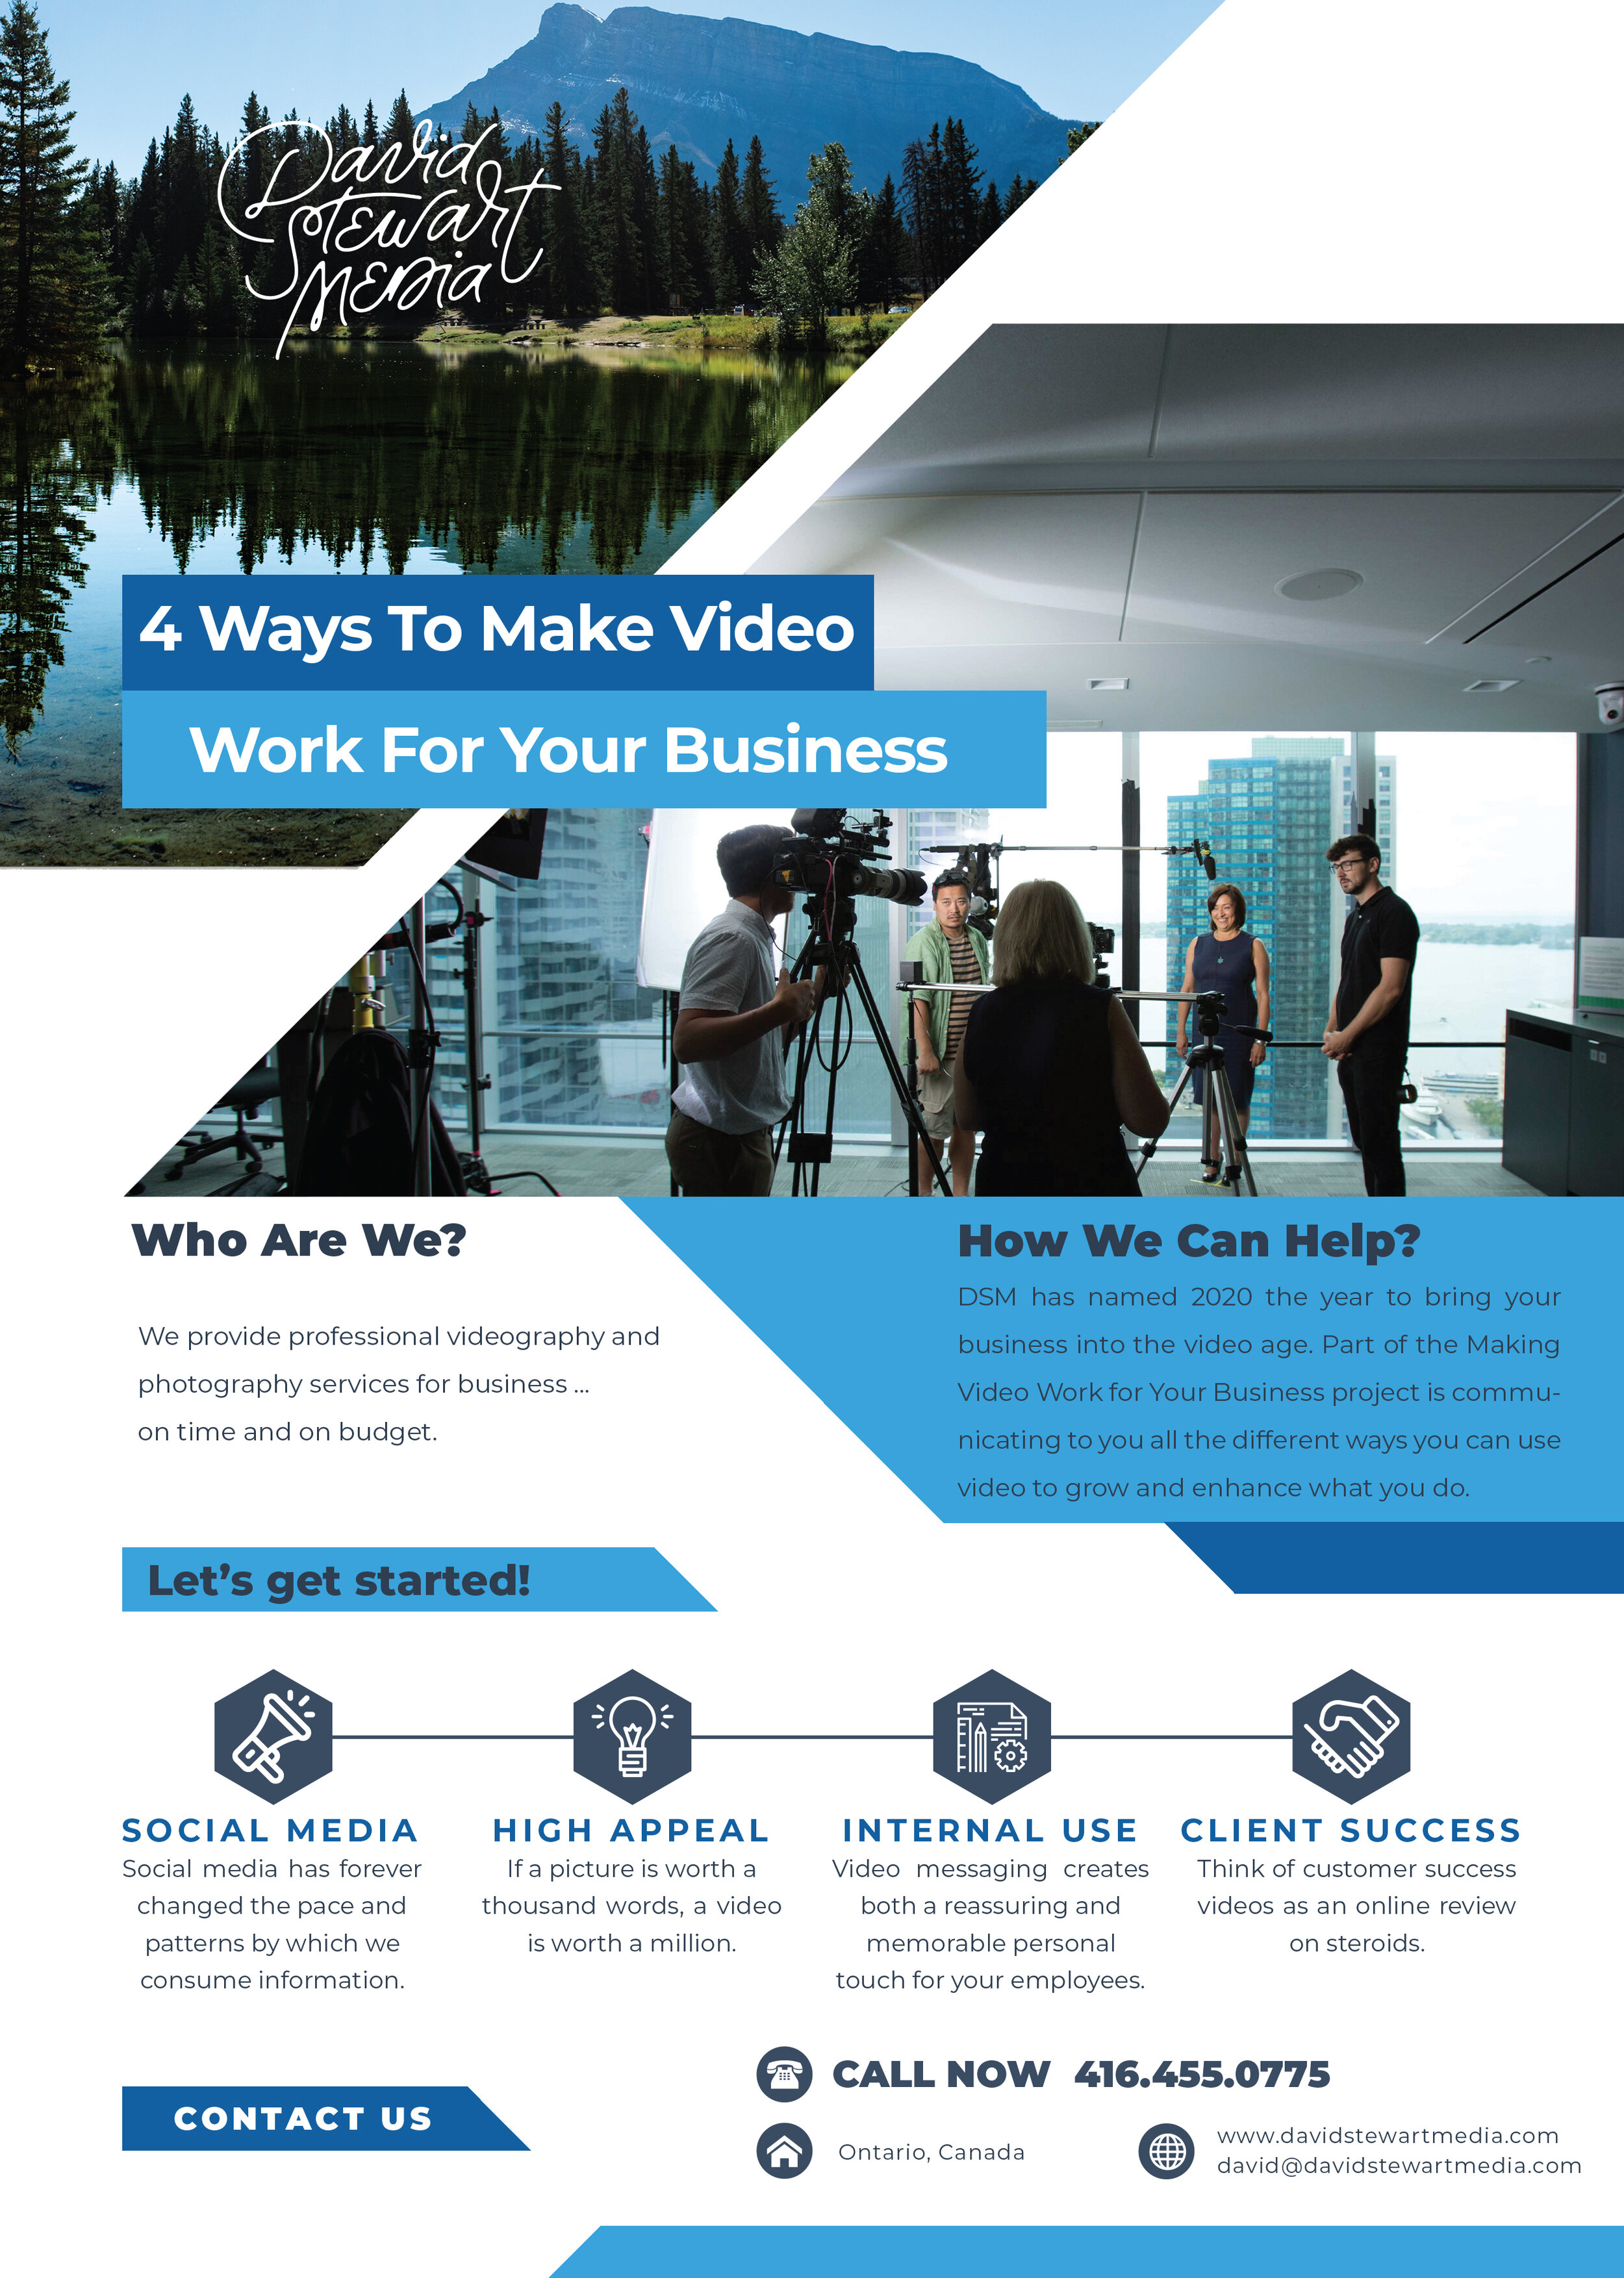 4 Way To Make Video Work For Your Business-1.jpg